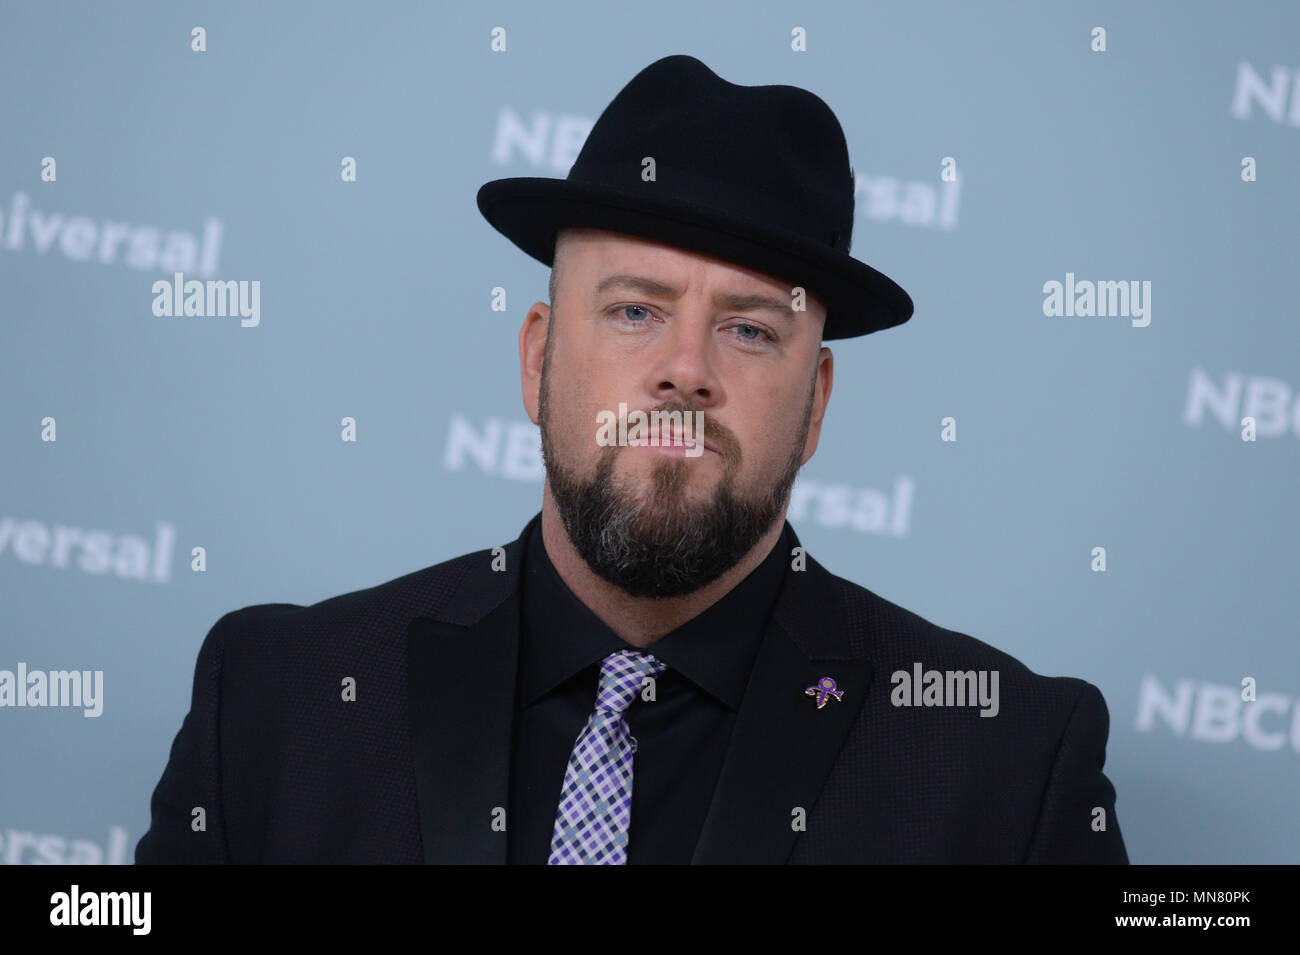 Chris Sullivan attends the Unequaled NBCUniversal Upfront campaign at Radio City Music Hall on May 14, 2018 in New York. Stock Photo